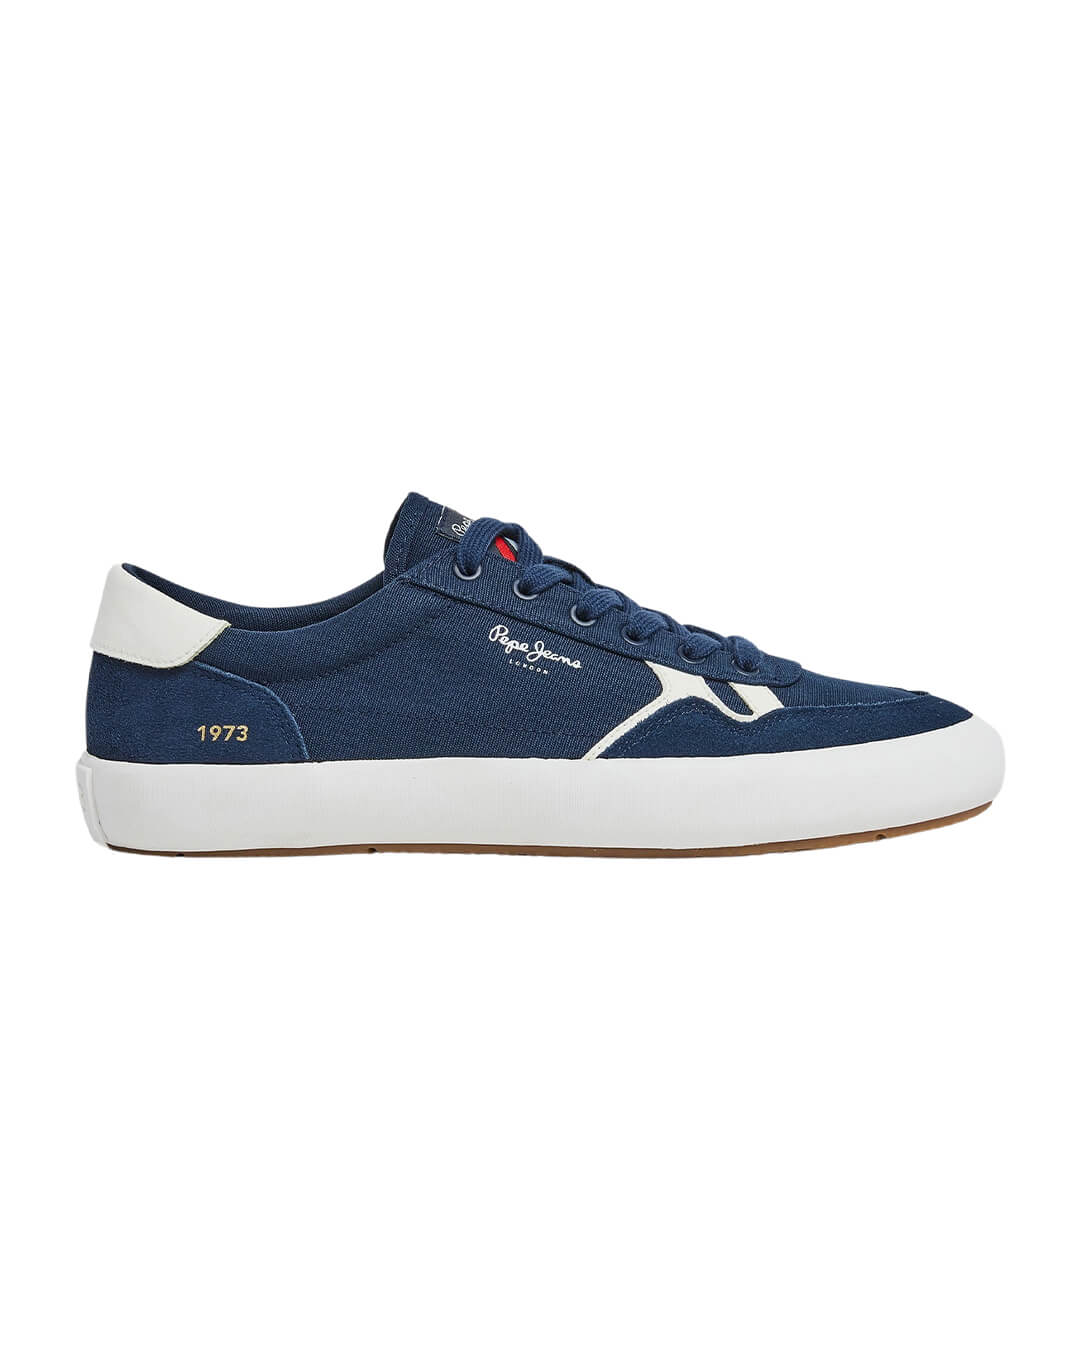 Pepe Jeans Shoes Pepe Jeans Navy Cotton Cupsole Trainers